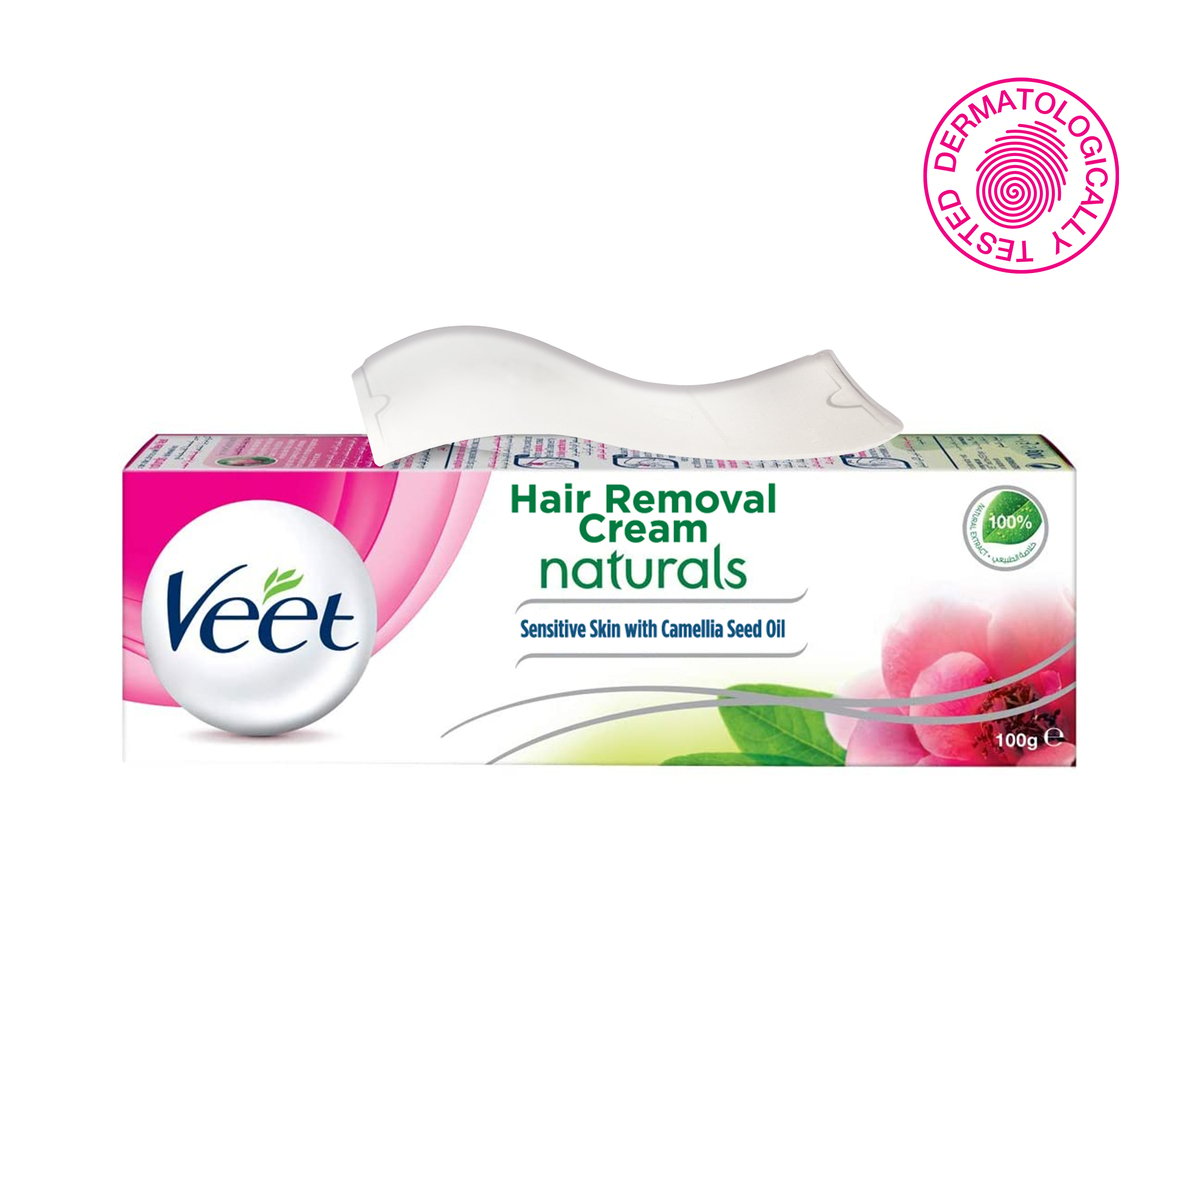 Veet Hair Removal Cream Naturals Sensitive Skin with Camelia Seed Oil 100 g